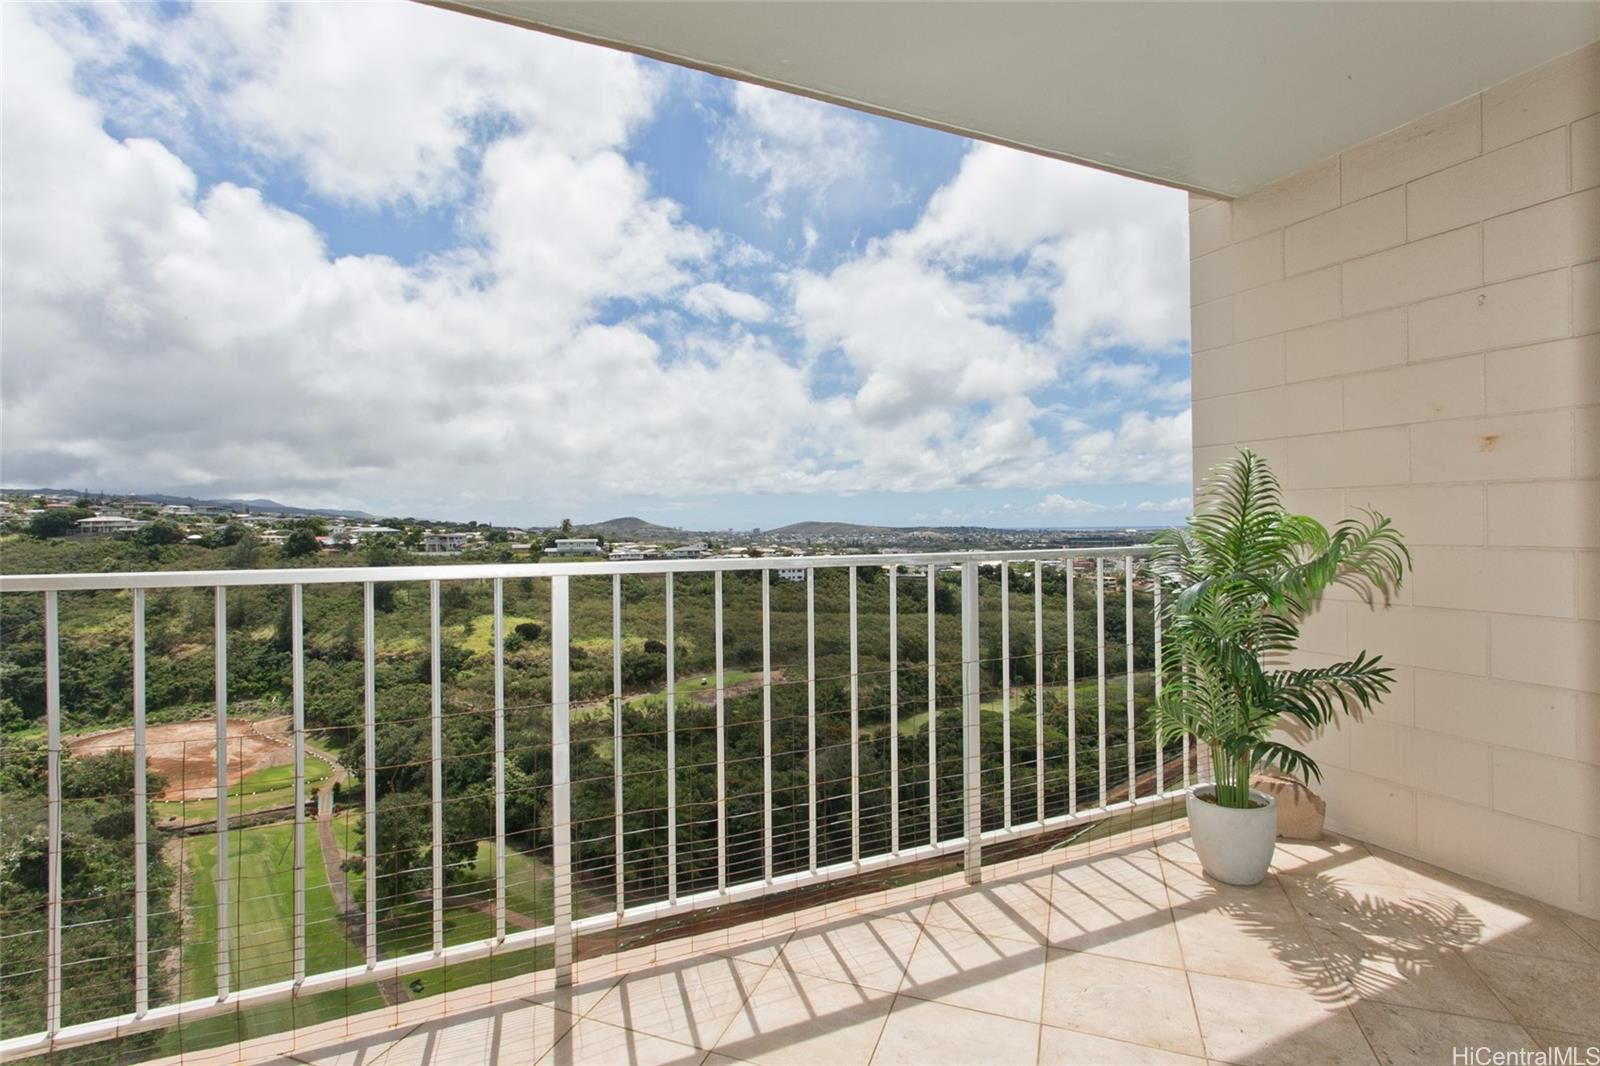 Unobstructed East views towards Honolulu affords you the morning sun and cool breezes.